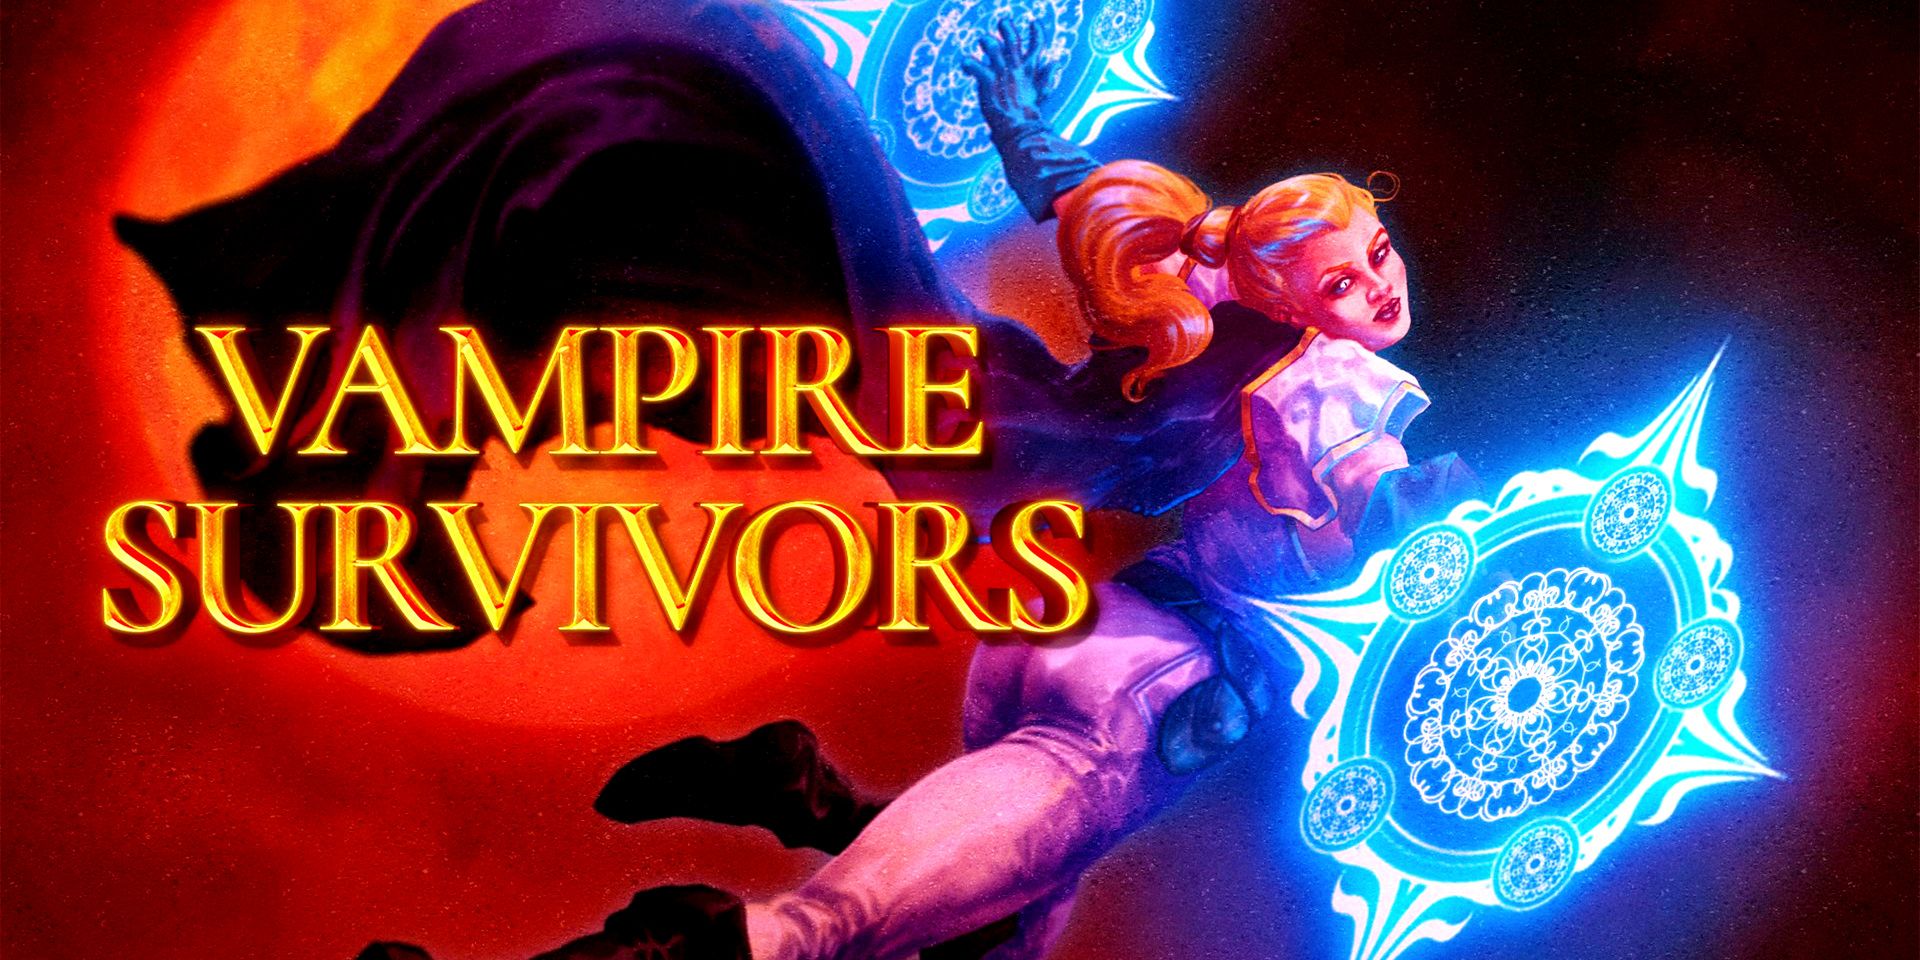 Title art for Vampire Survivors, showing the game's name and a character with two blue, magical discs in her hands.